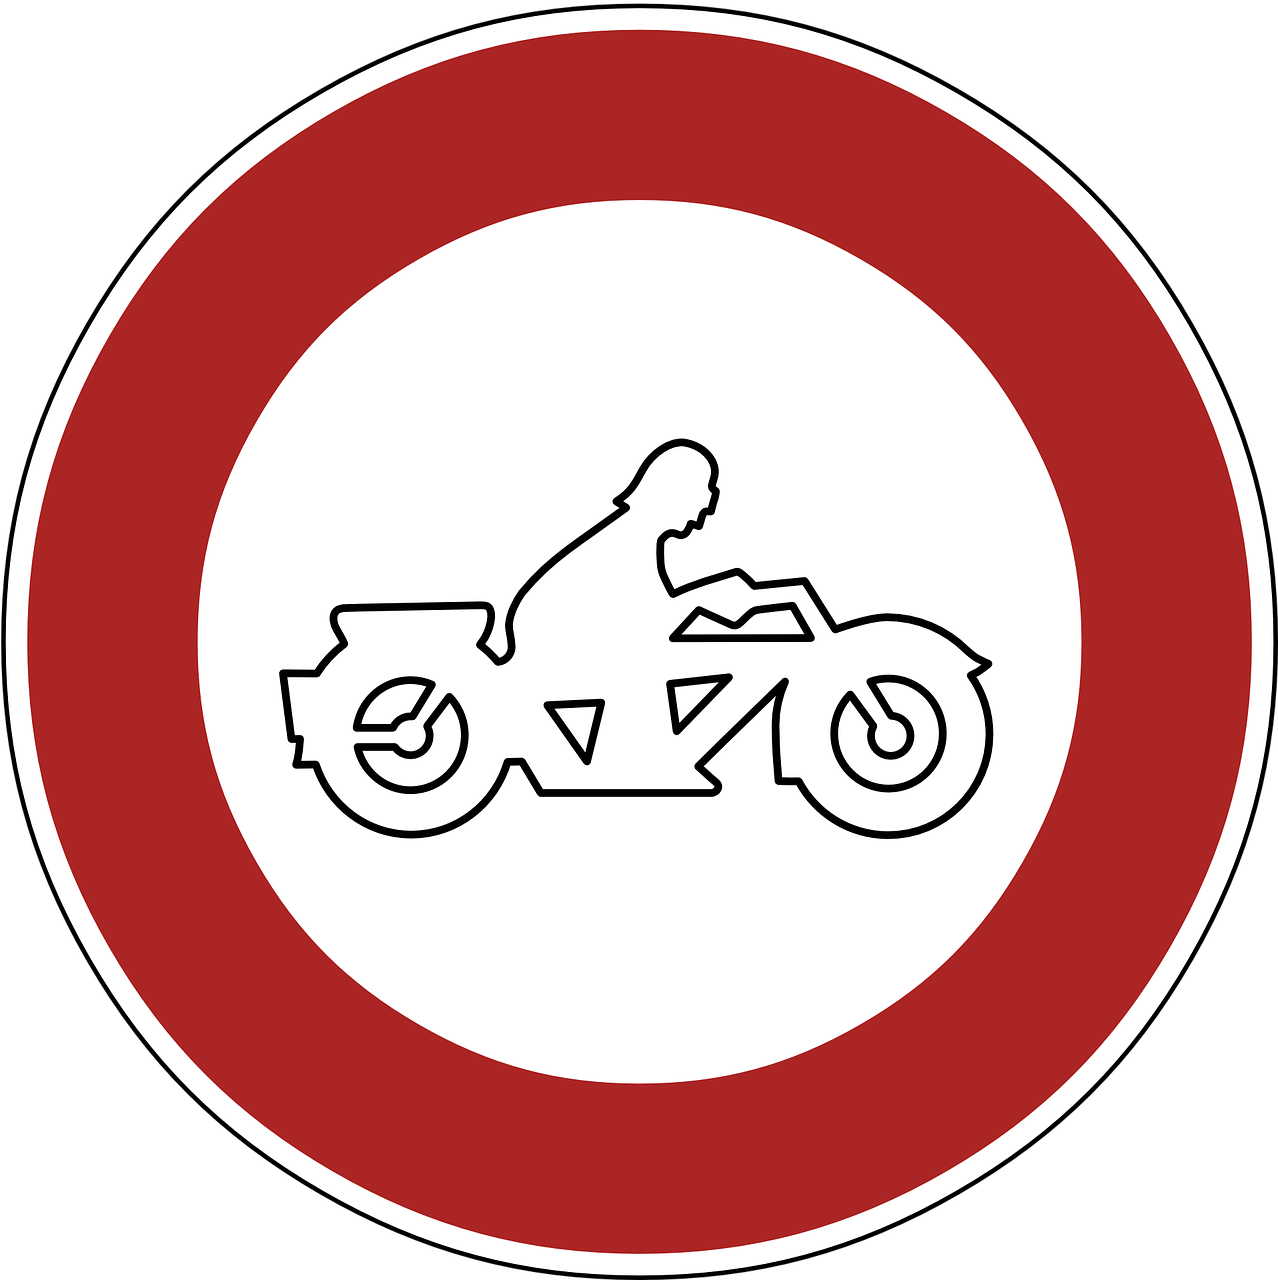 ban banned motorcycles free photo